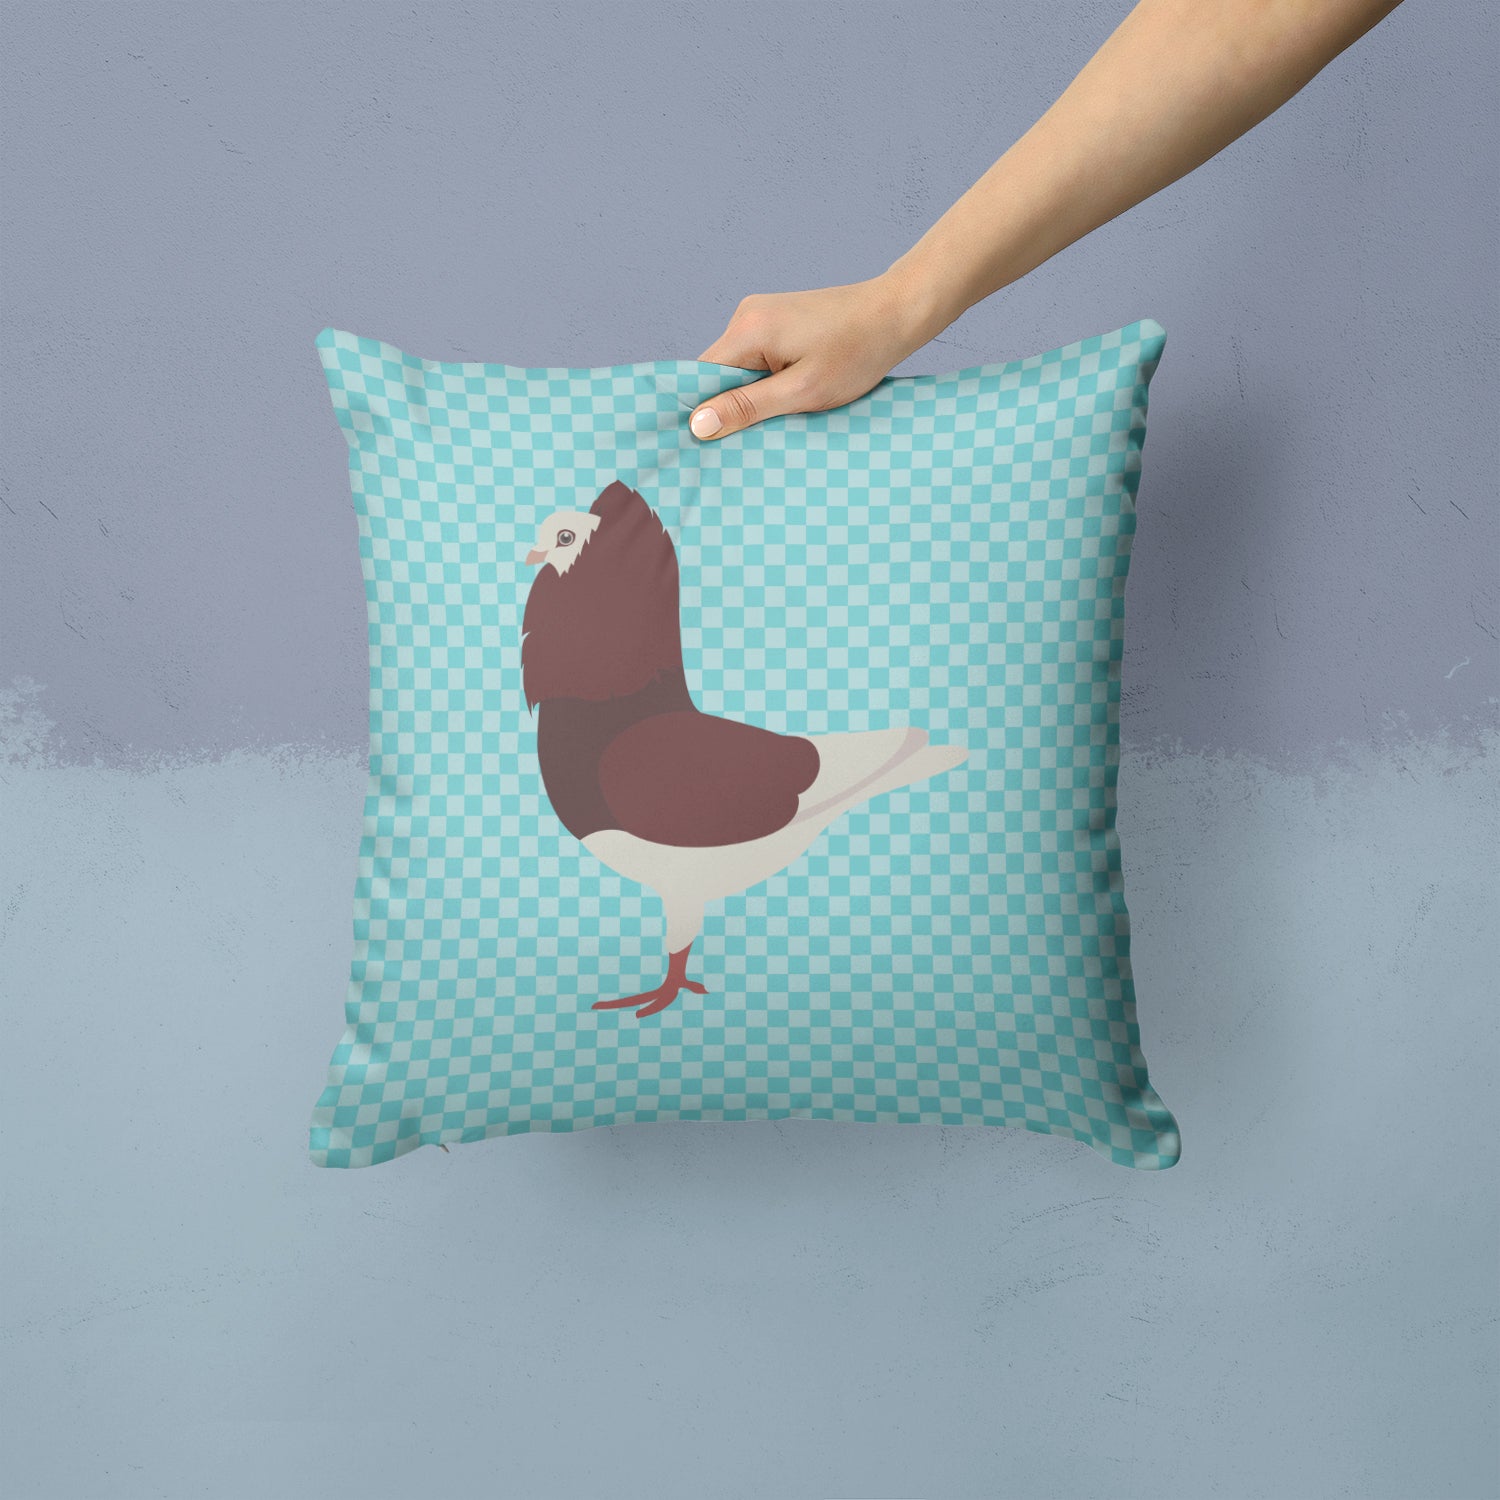 Capuchin Red Pigeon Blue Check Fabric Decorative Pillow BB8122PW1414 - the-store.com